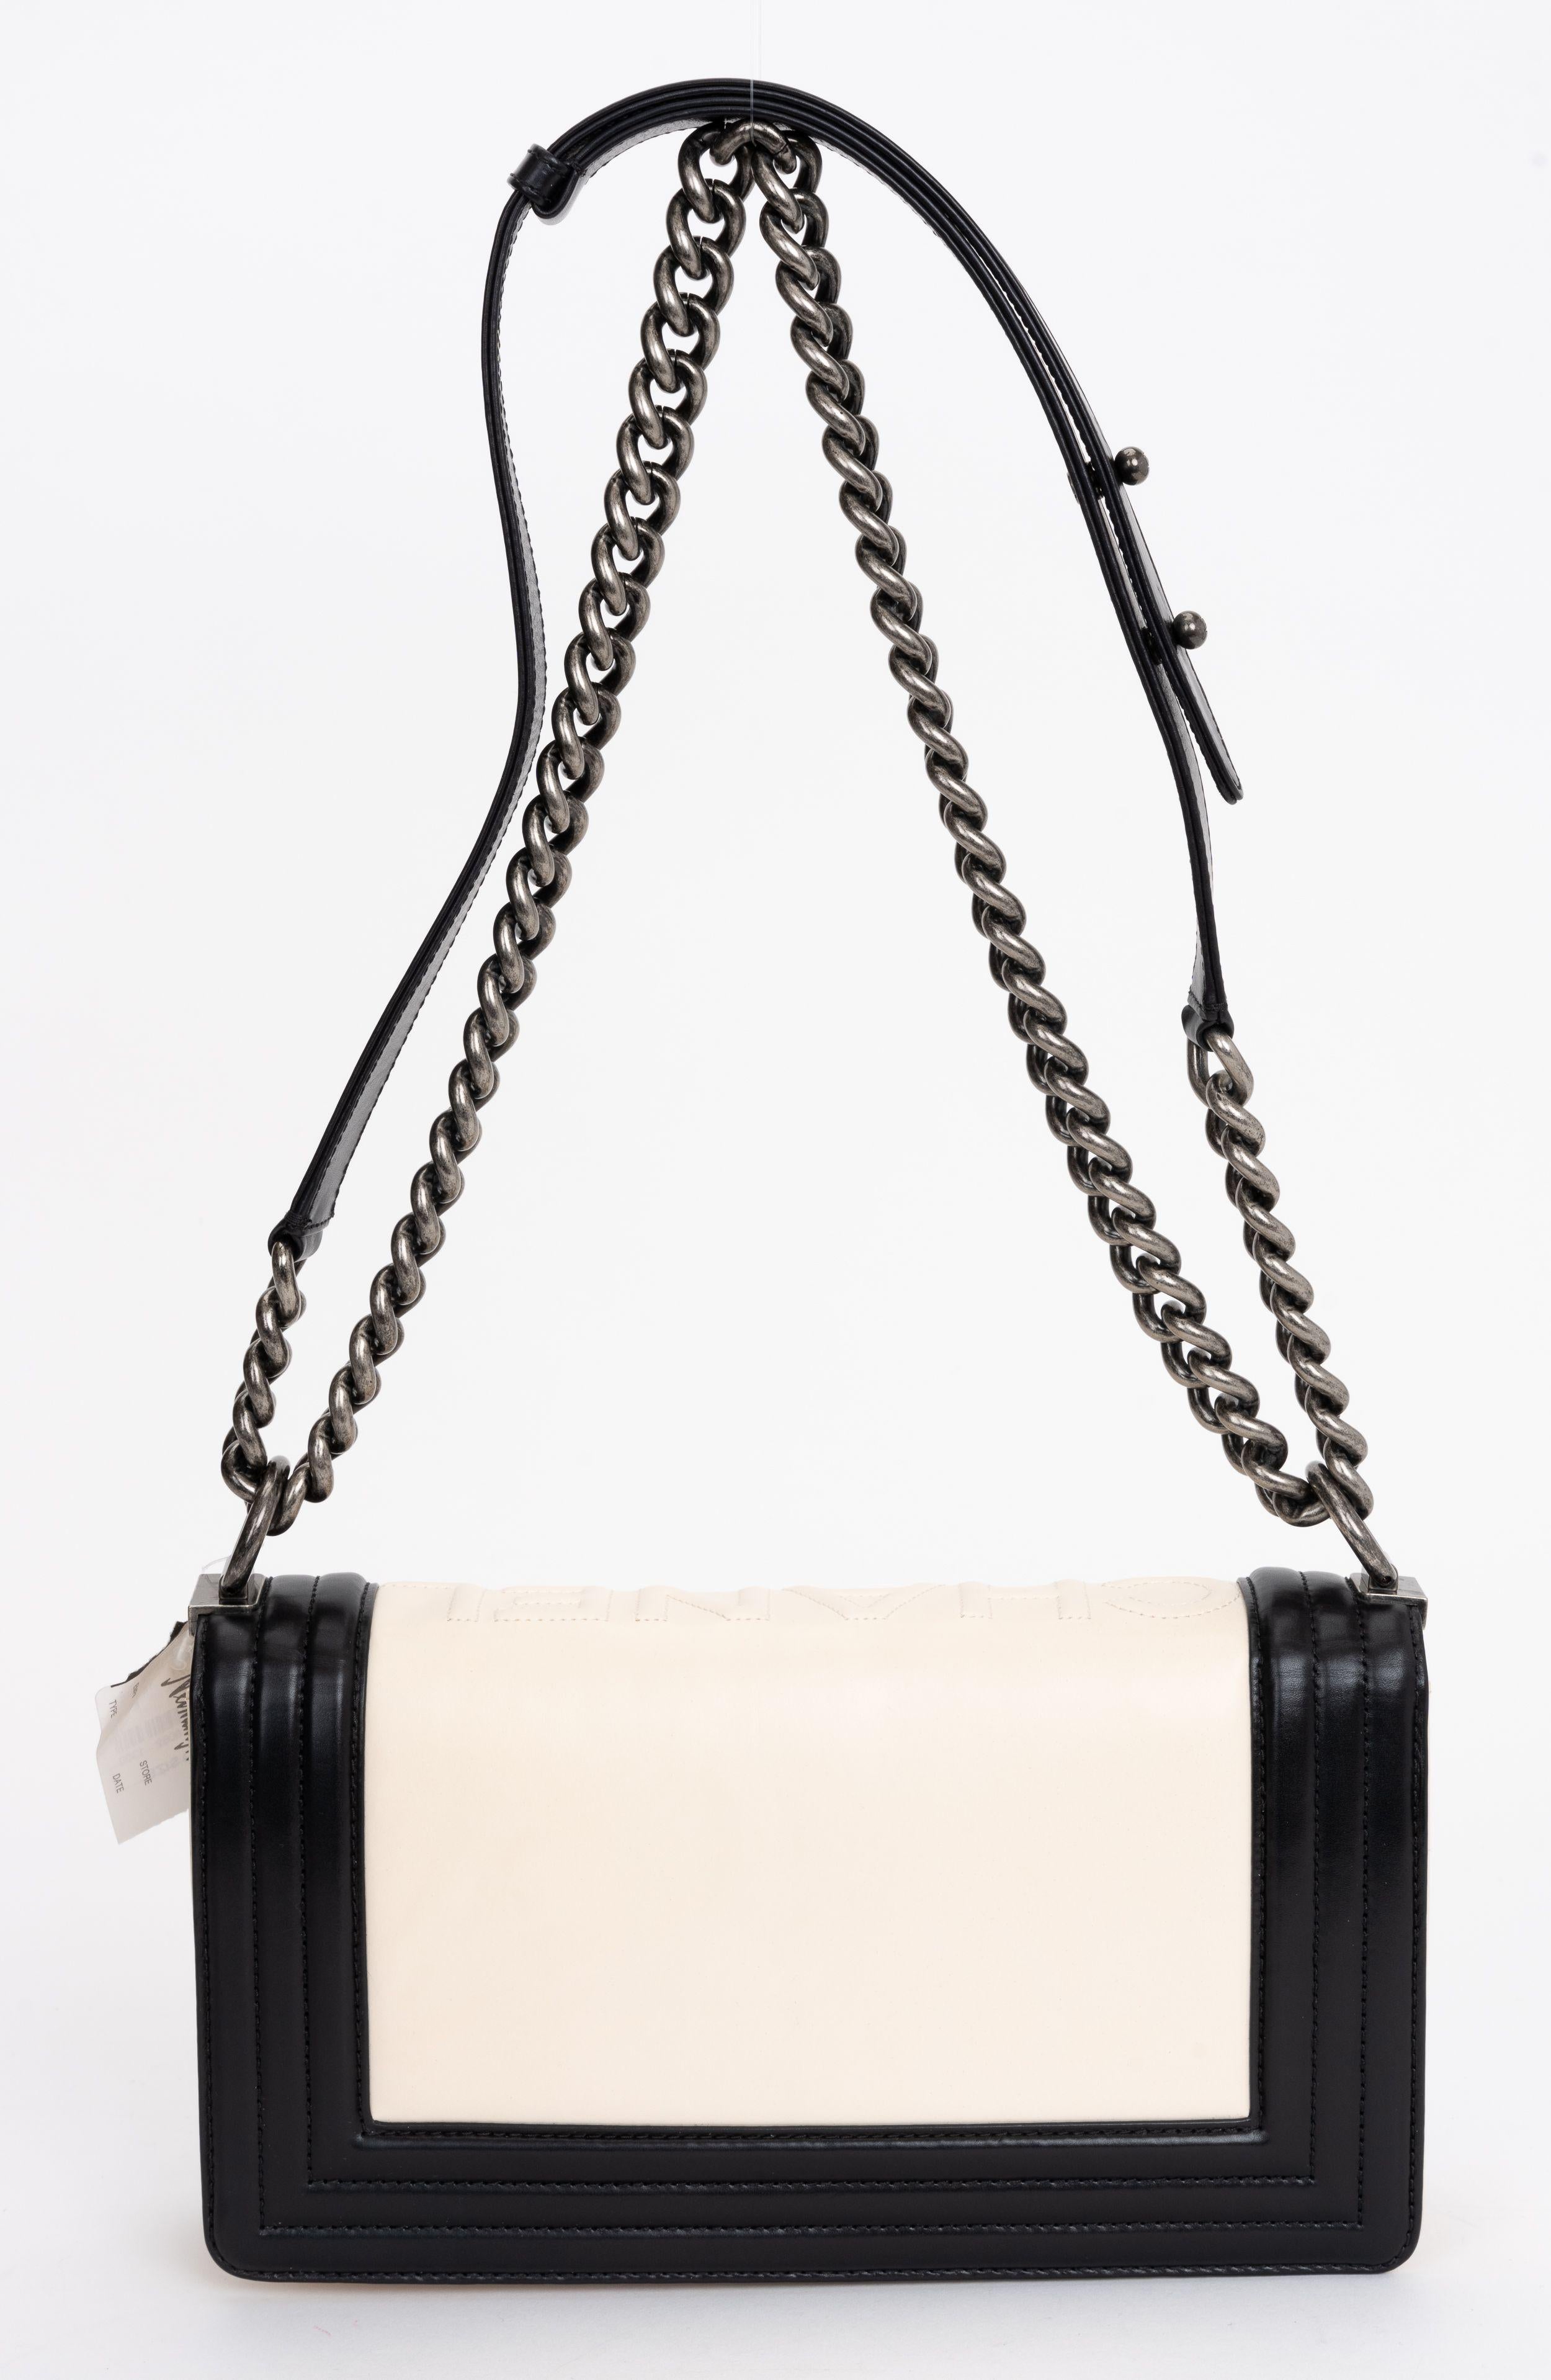 Chanel New 2 Tone Glazed Boy Flap Bag In New Condition For Sale In West Hollywood, CA